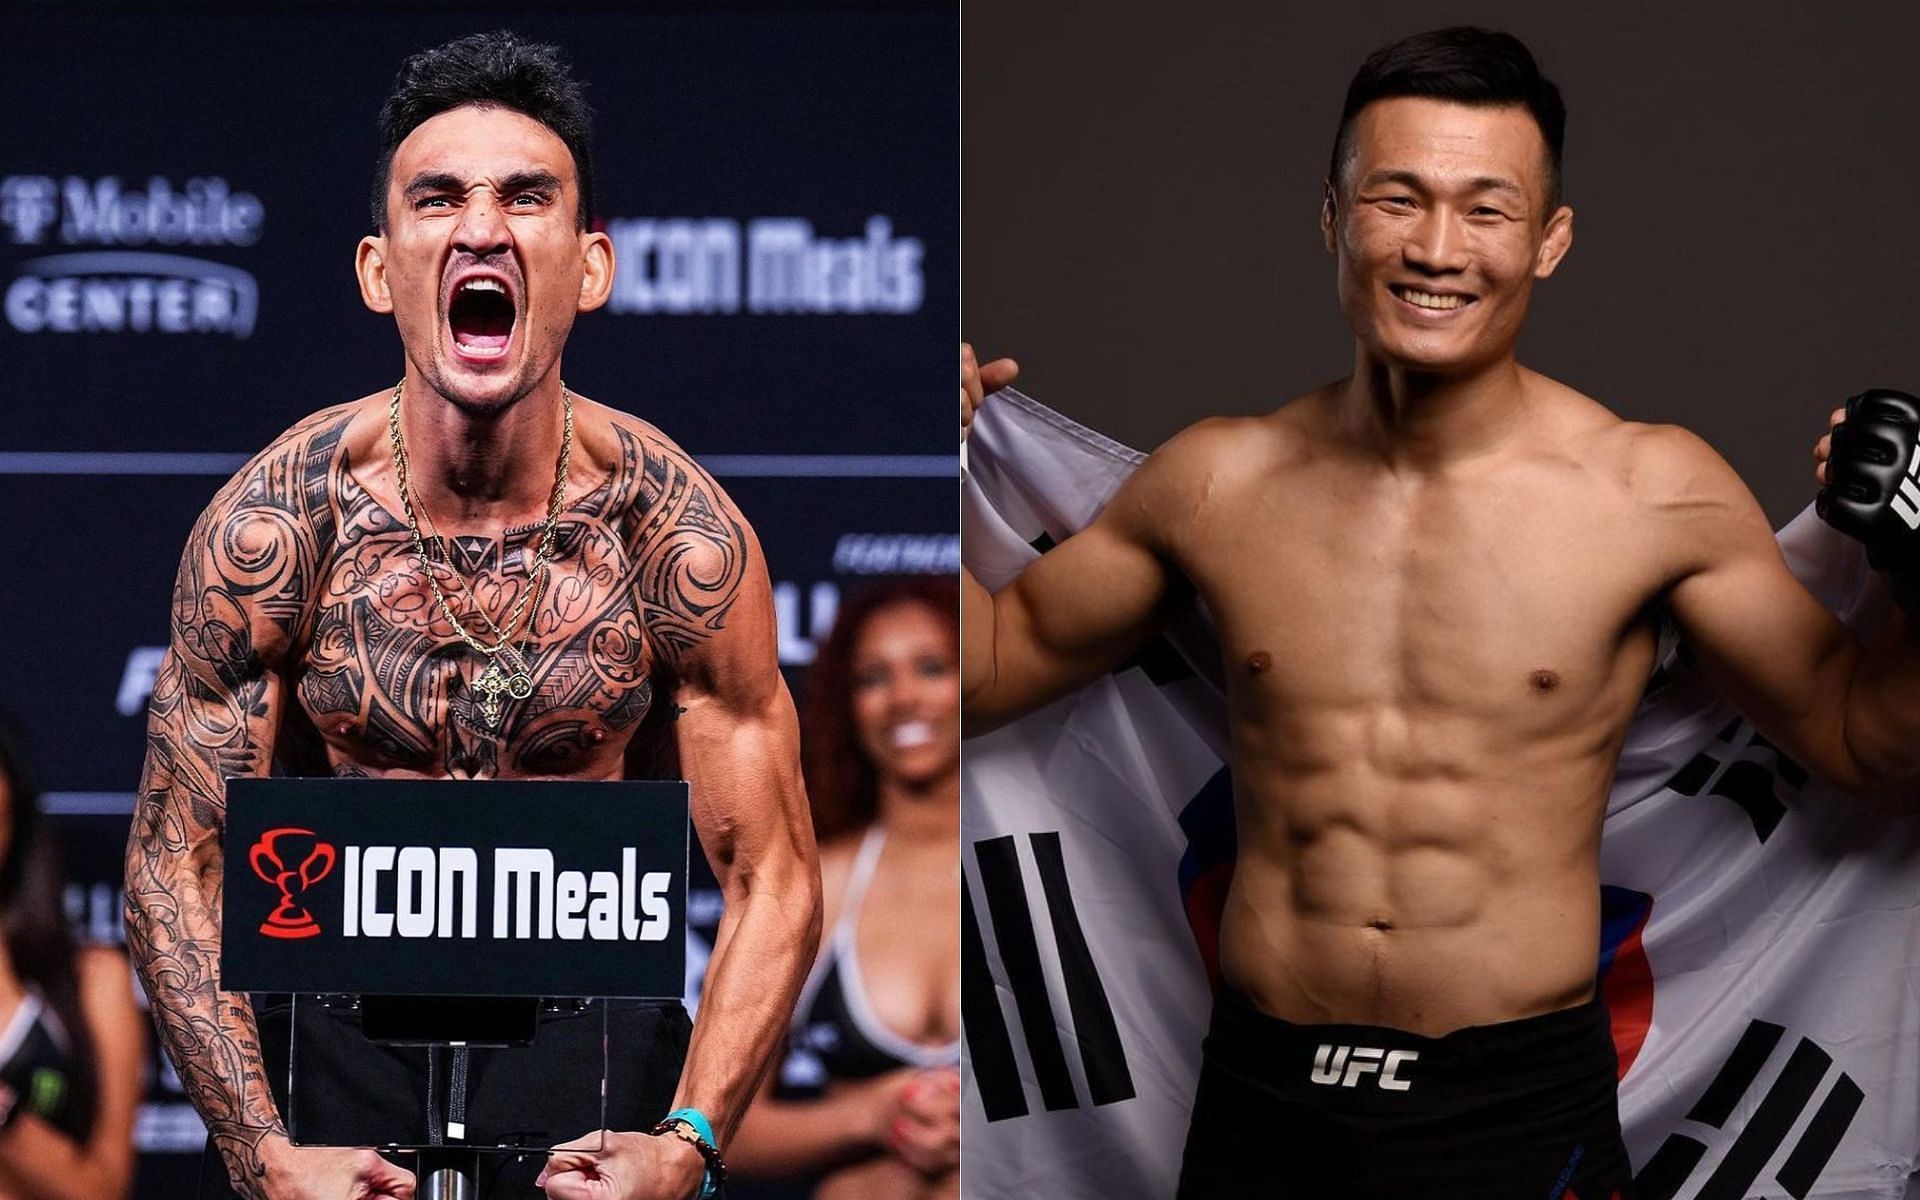 Max Holloway (left) Chan Sung Jung (right) [Image courtesy @blessedmma @koreanzombiemma on Instagram]